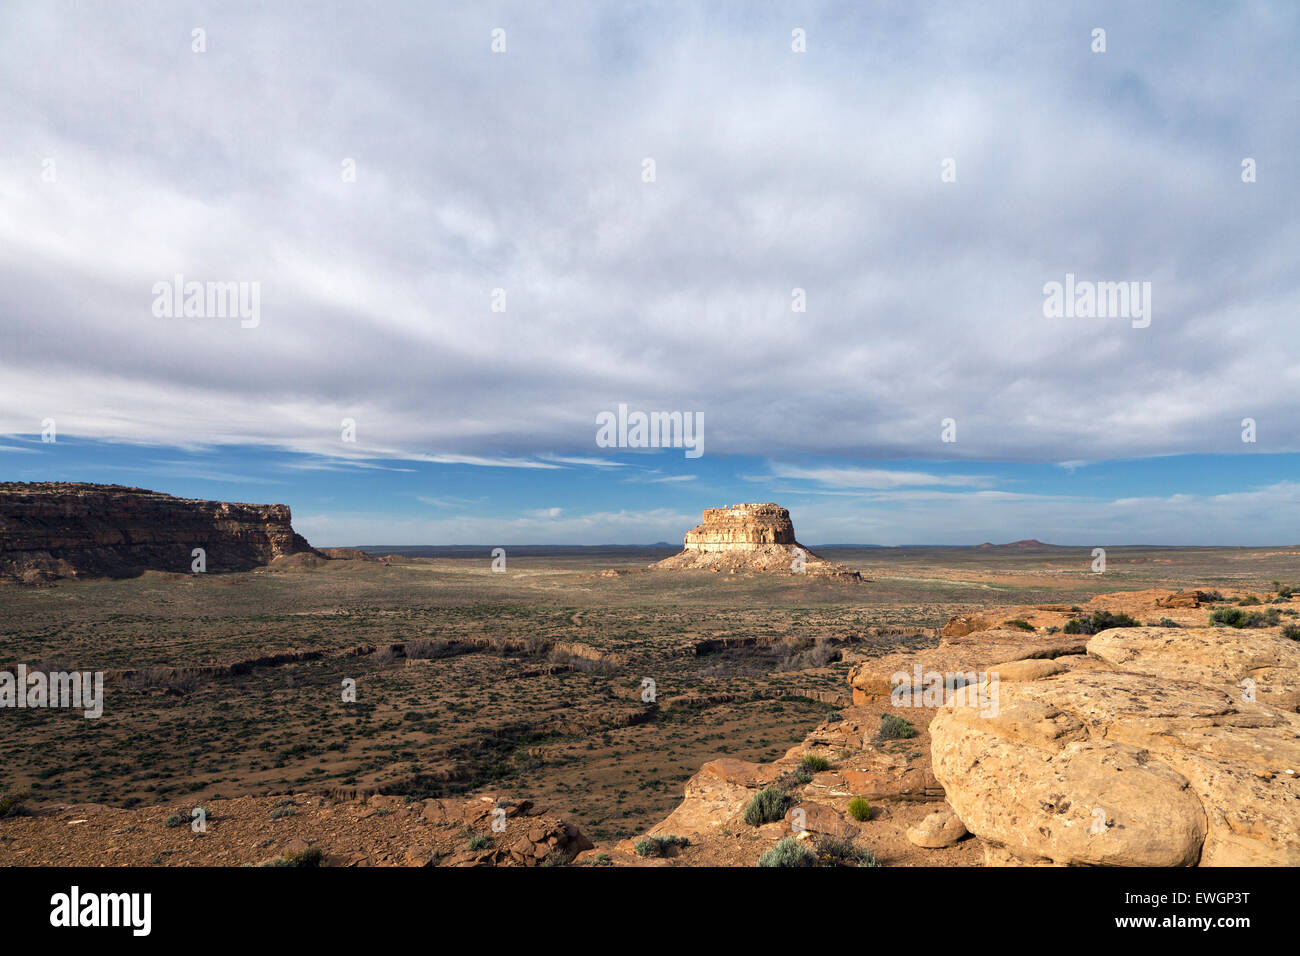 The 380 foot tall Fajada Butte rises above the valley floor in Chaco Culture National Historic Park. Stock Photo